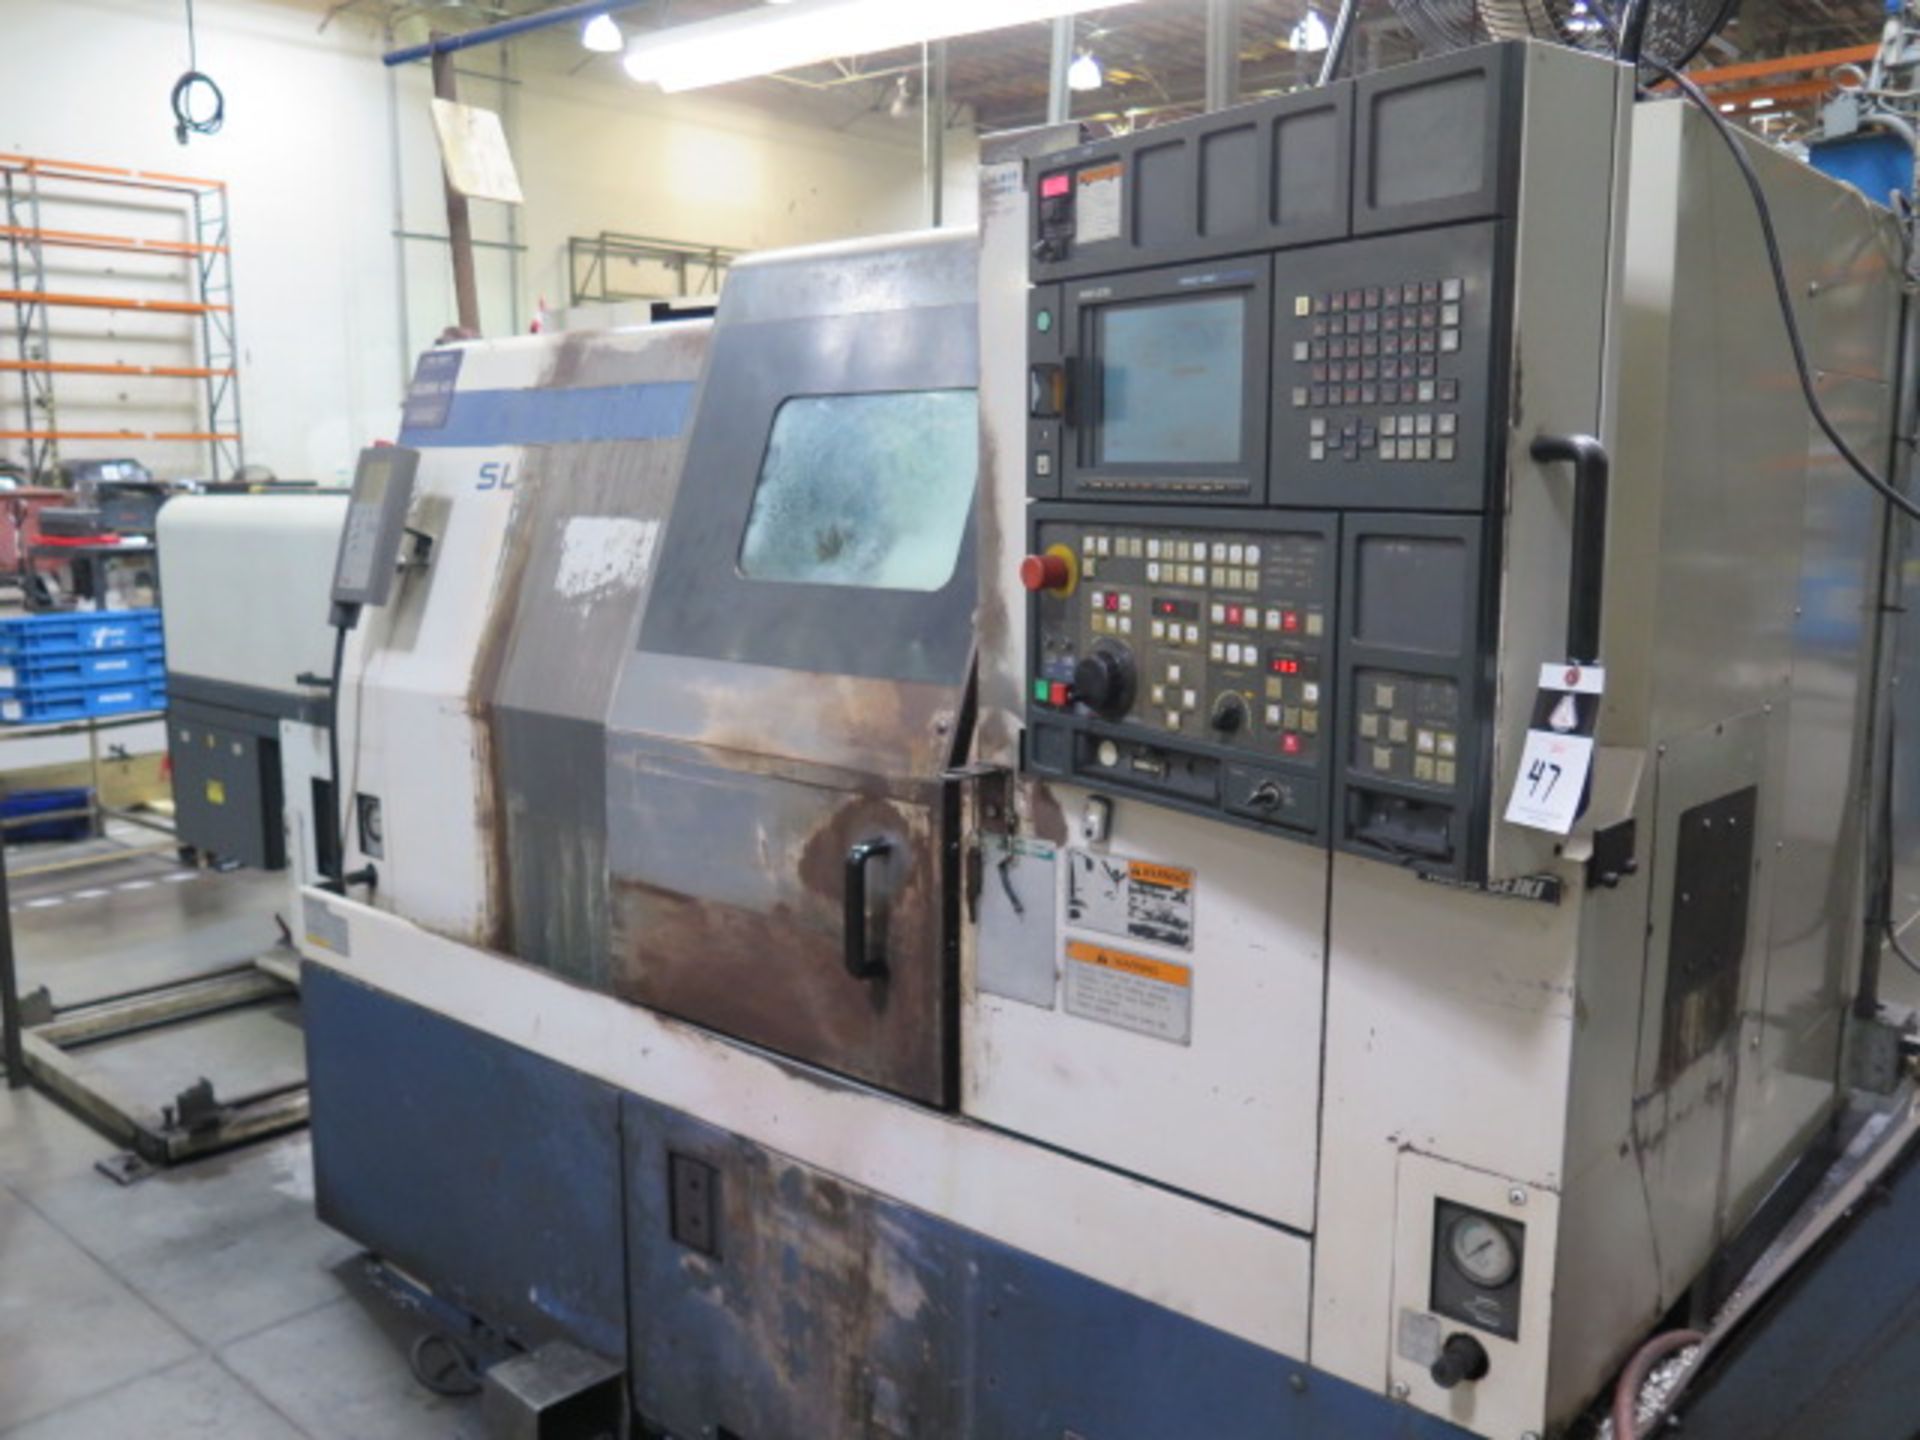 1998 Mori Seiki SL-250BMC/500 Live Turret CNC Turning Center s/n 1256 w/ MSC-501 Control,SOLD AS IS - Image 2 of 14